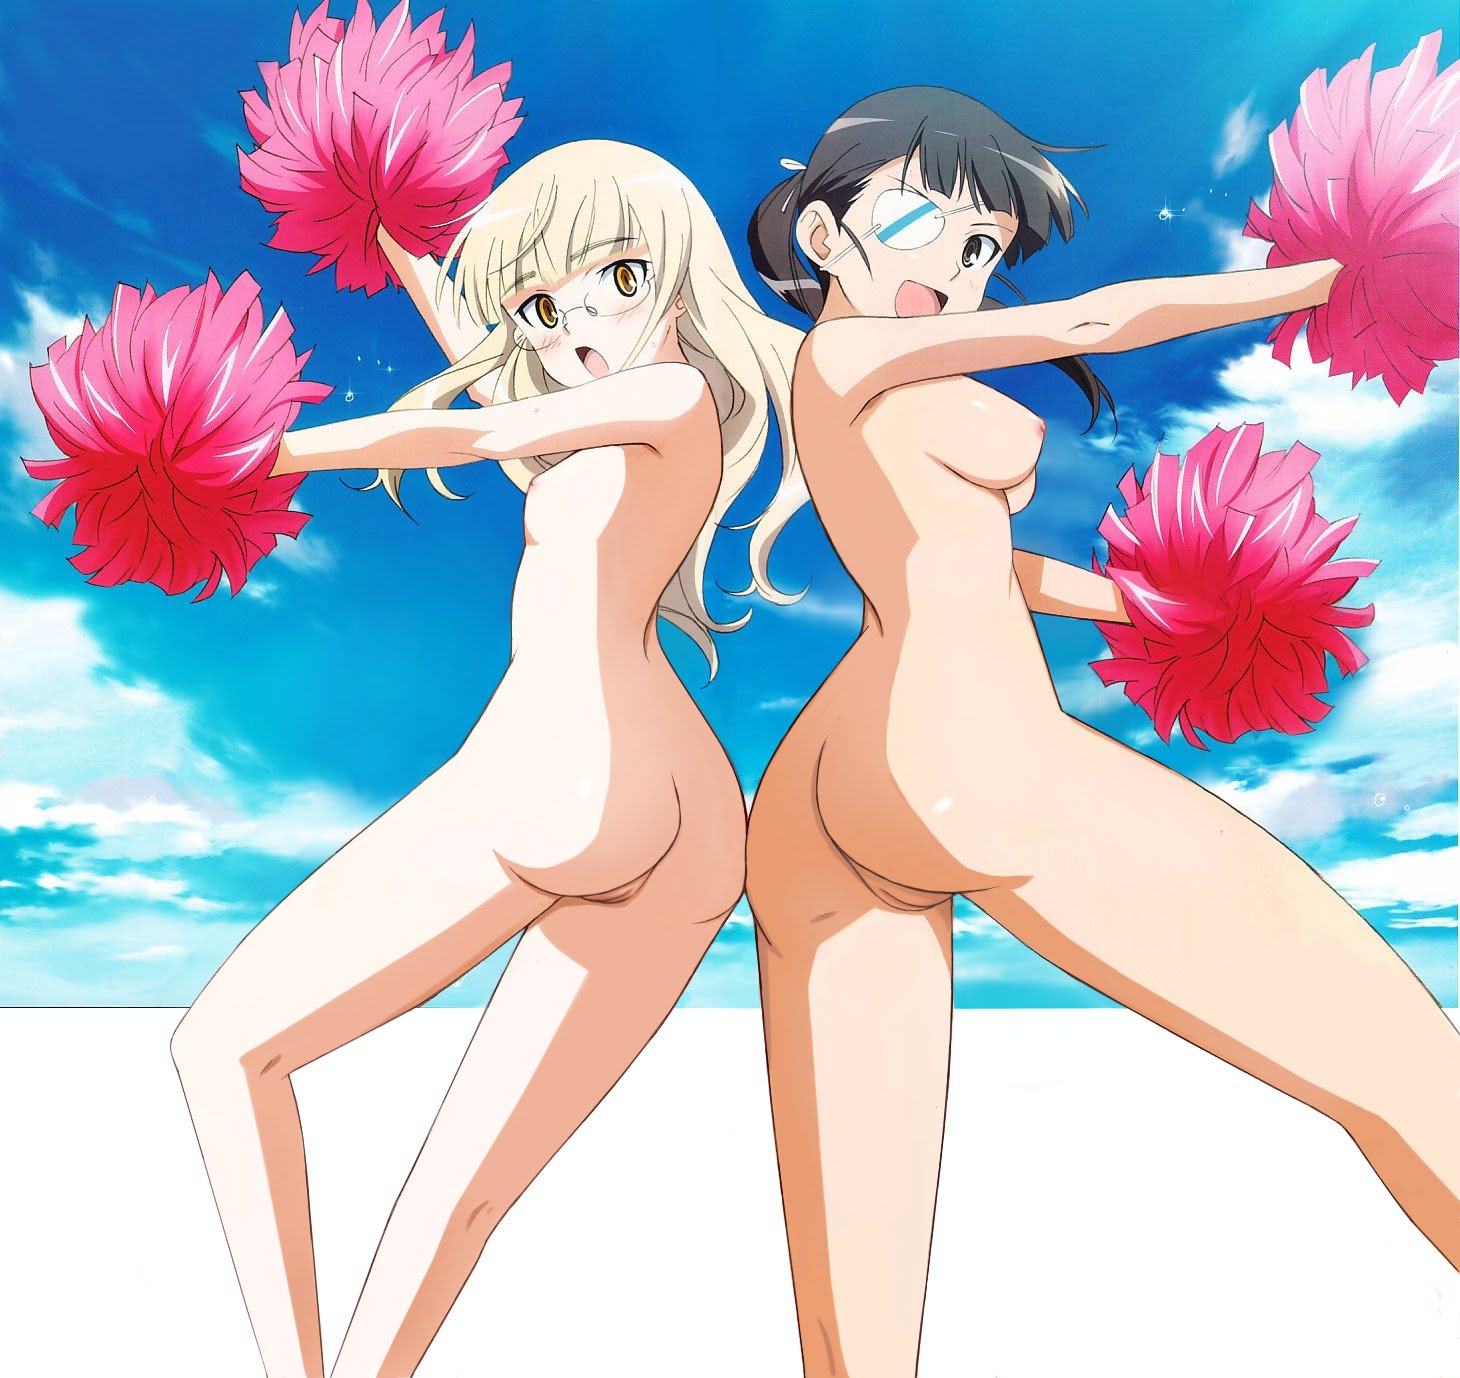 Strike Witches. 